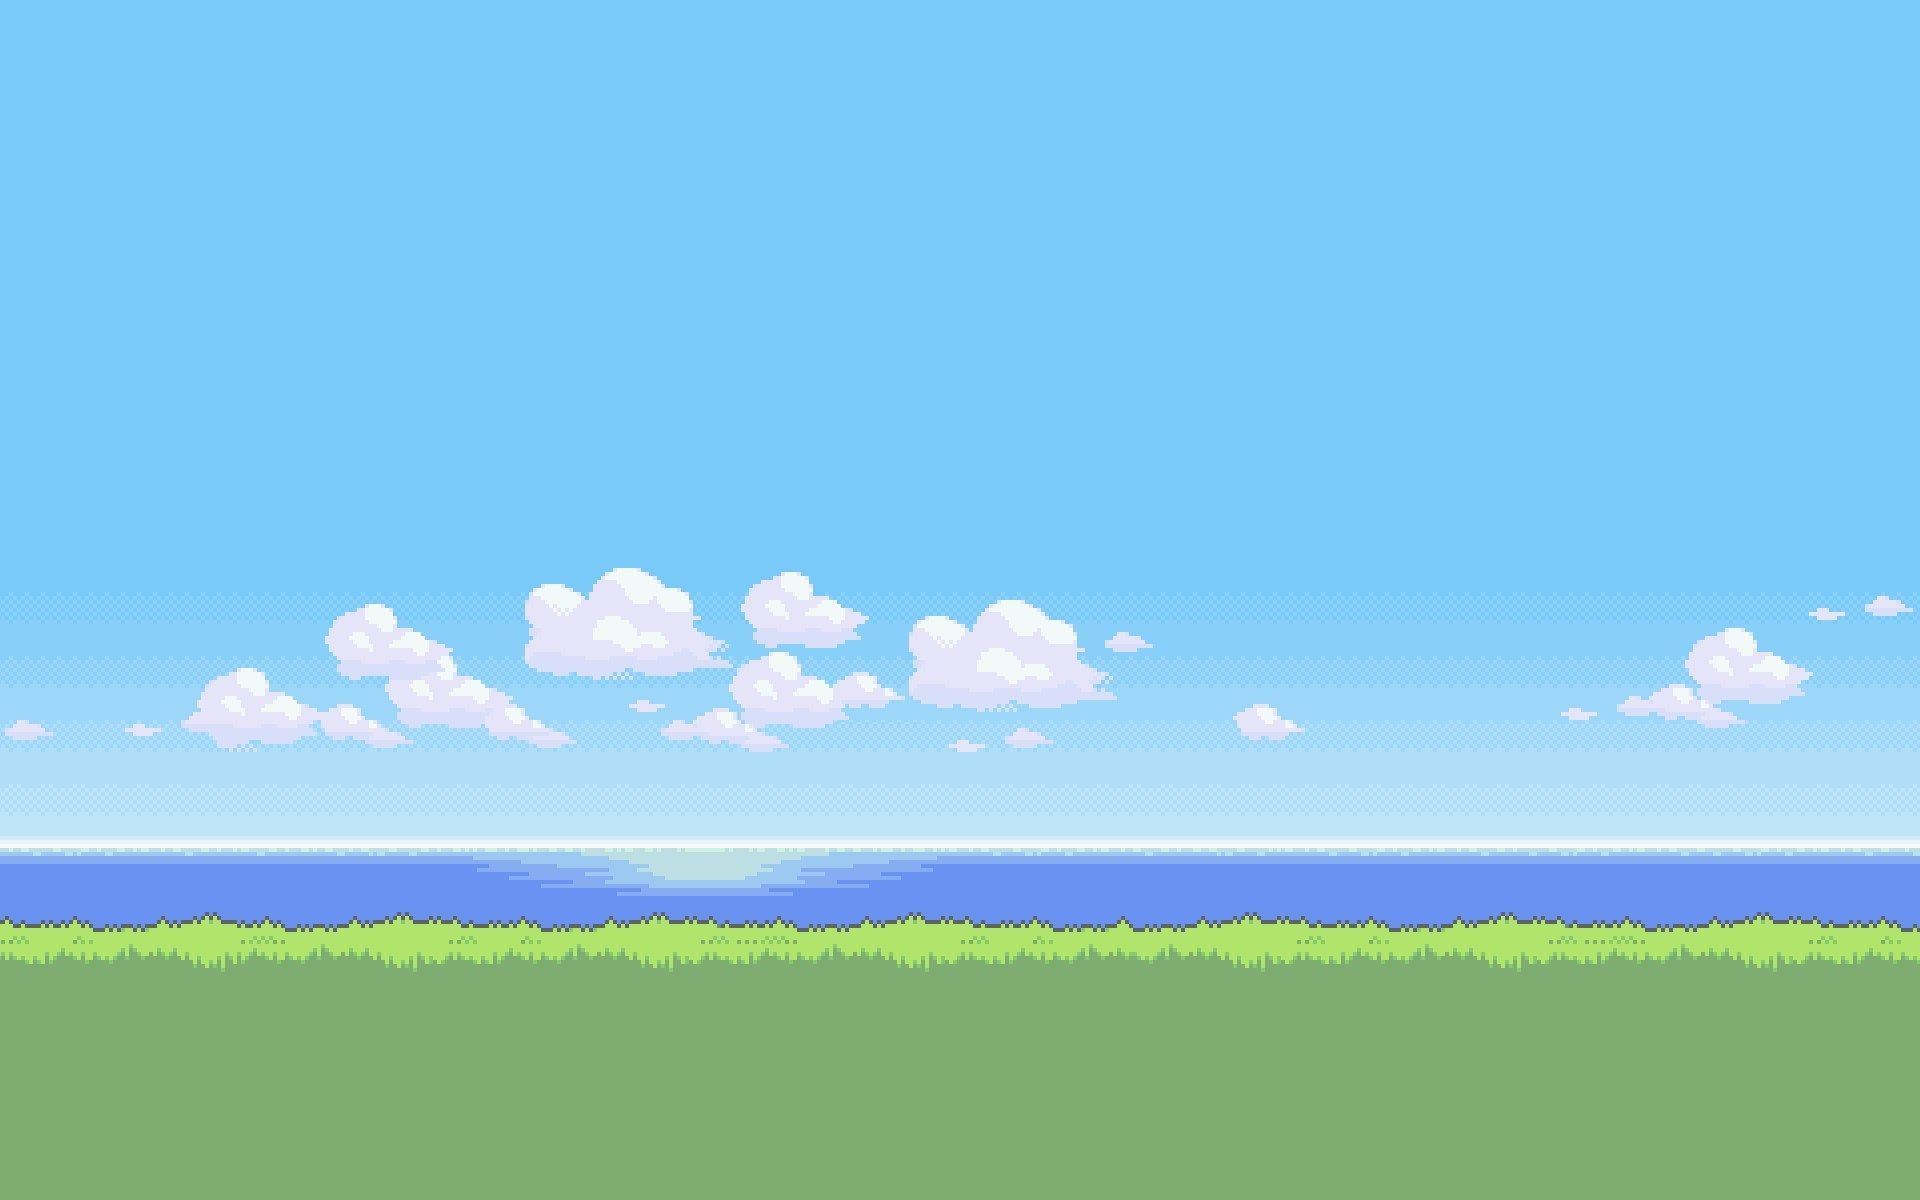 A cartoonish image of the ocean and sky - 1920x1200